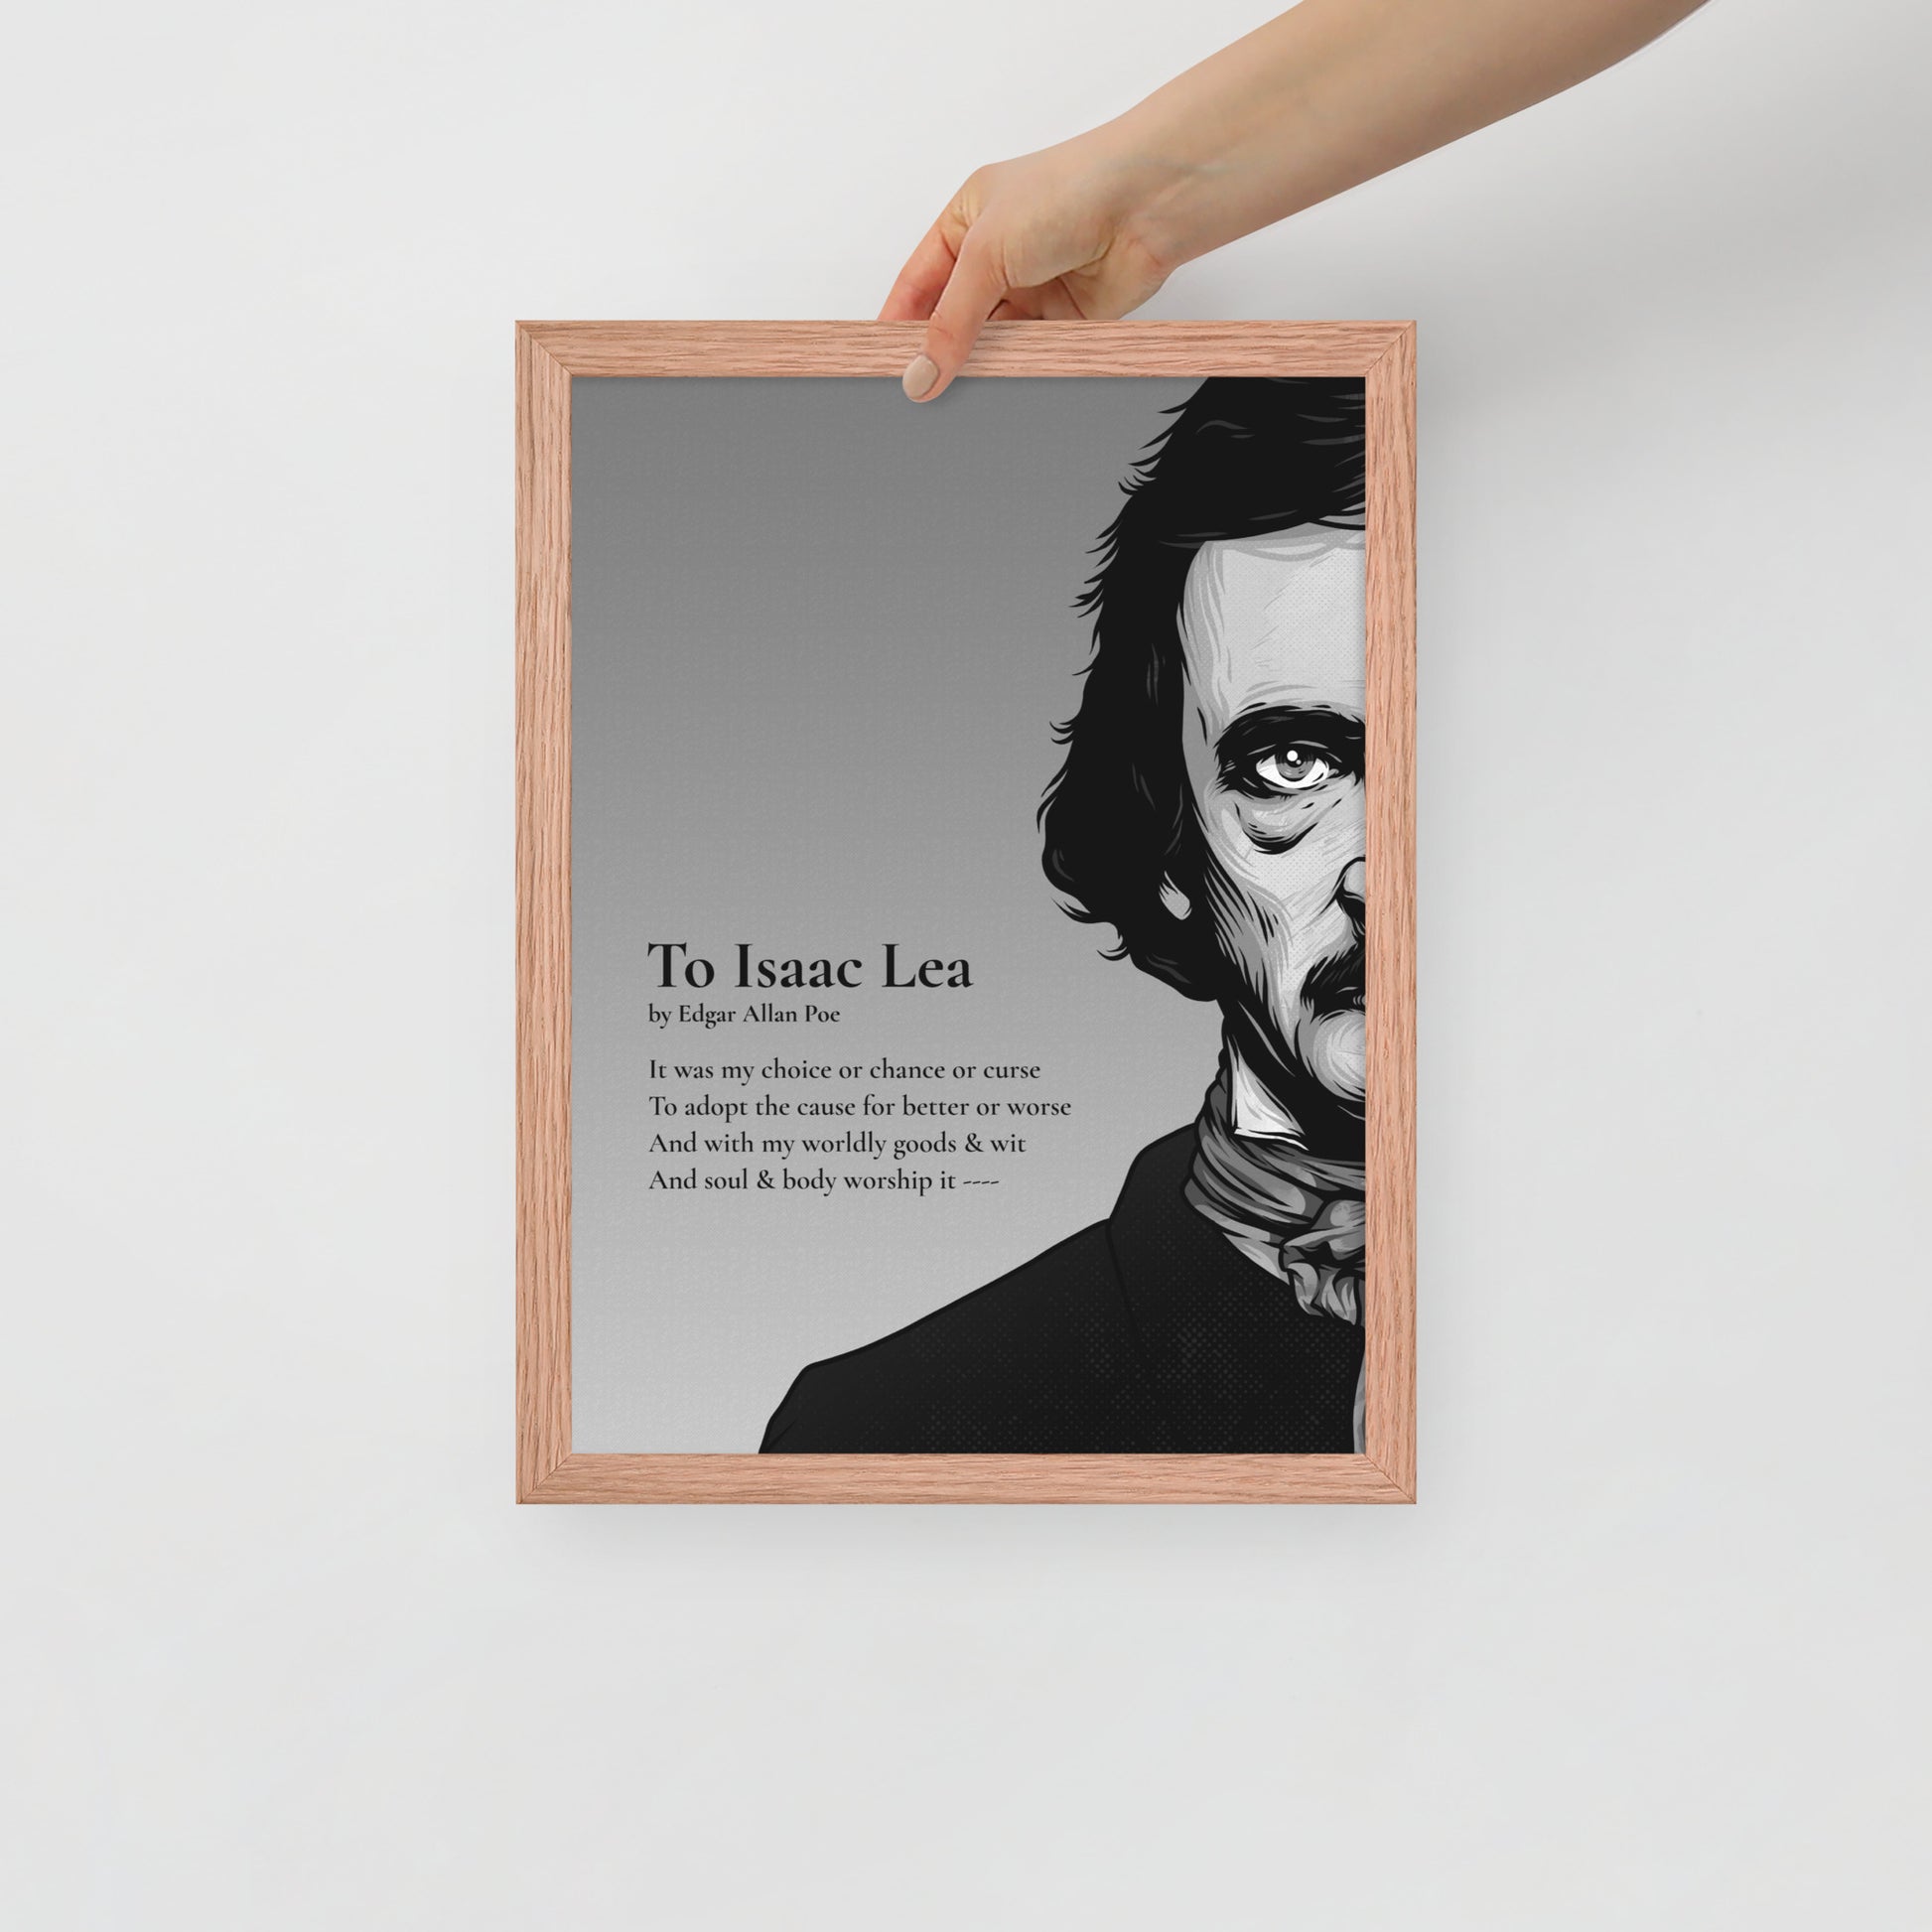 Edgar Allan Poe's 'To Isaac Lea' Framed Matted Poster - 12 x 16 Red Oak Frame